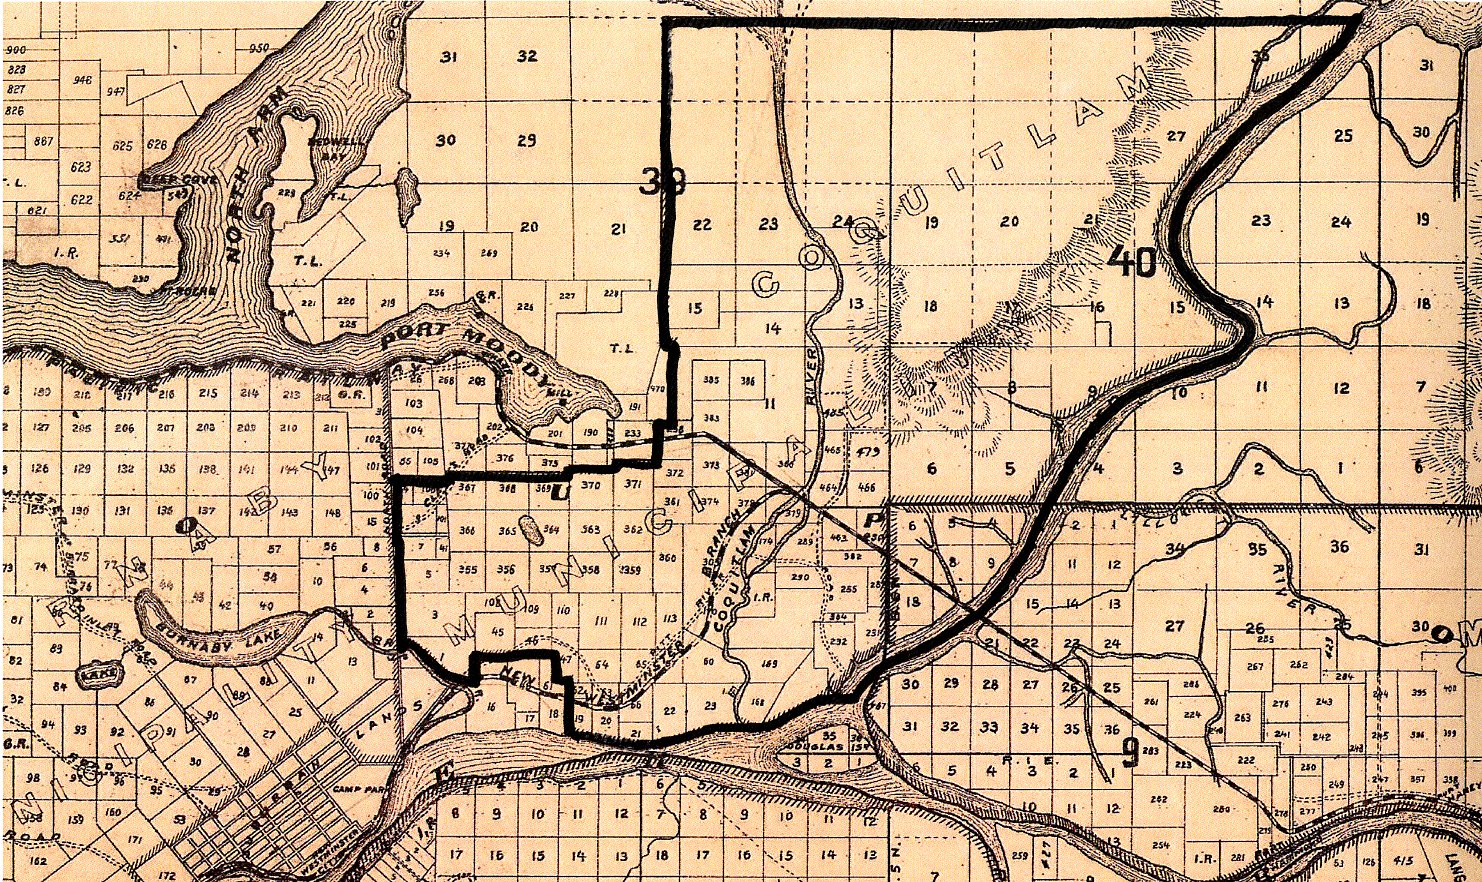 Coquitlam's 1894 Boundaries Drawn on a Map of New Westminster District from 1892 (JPG) Opens in new window